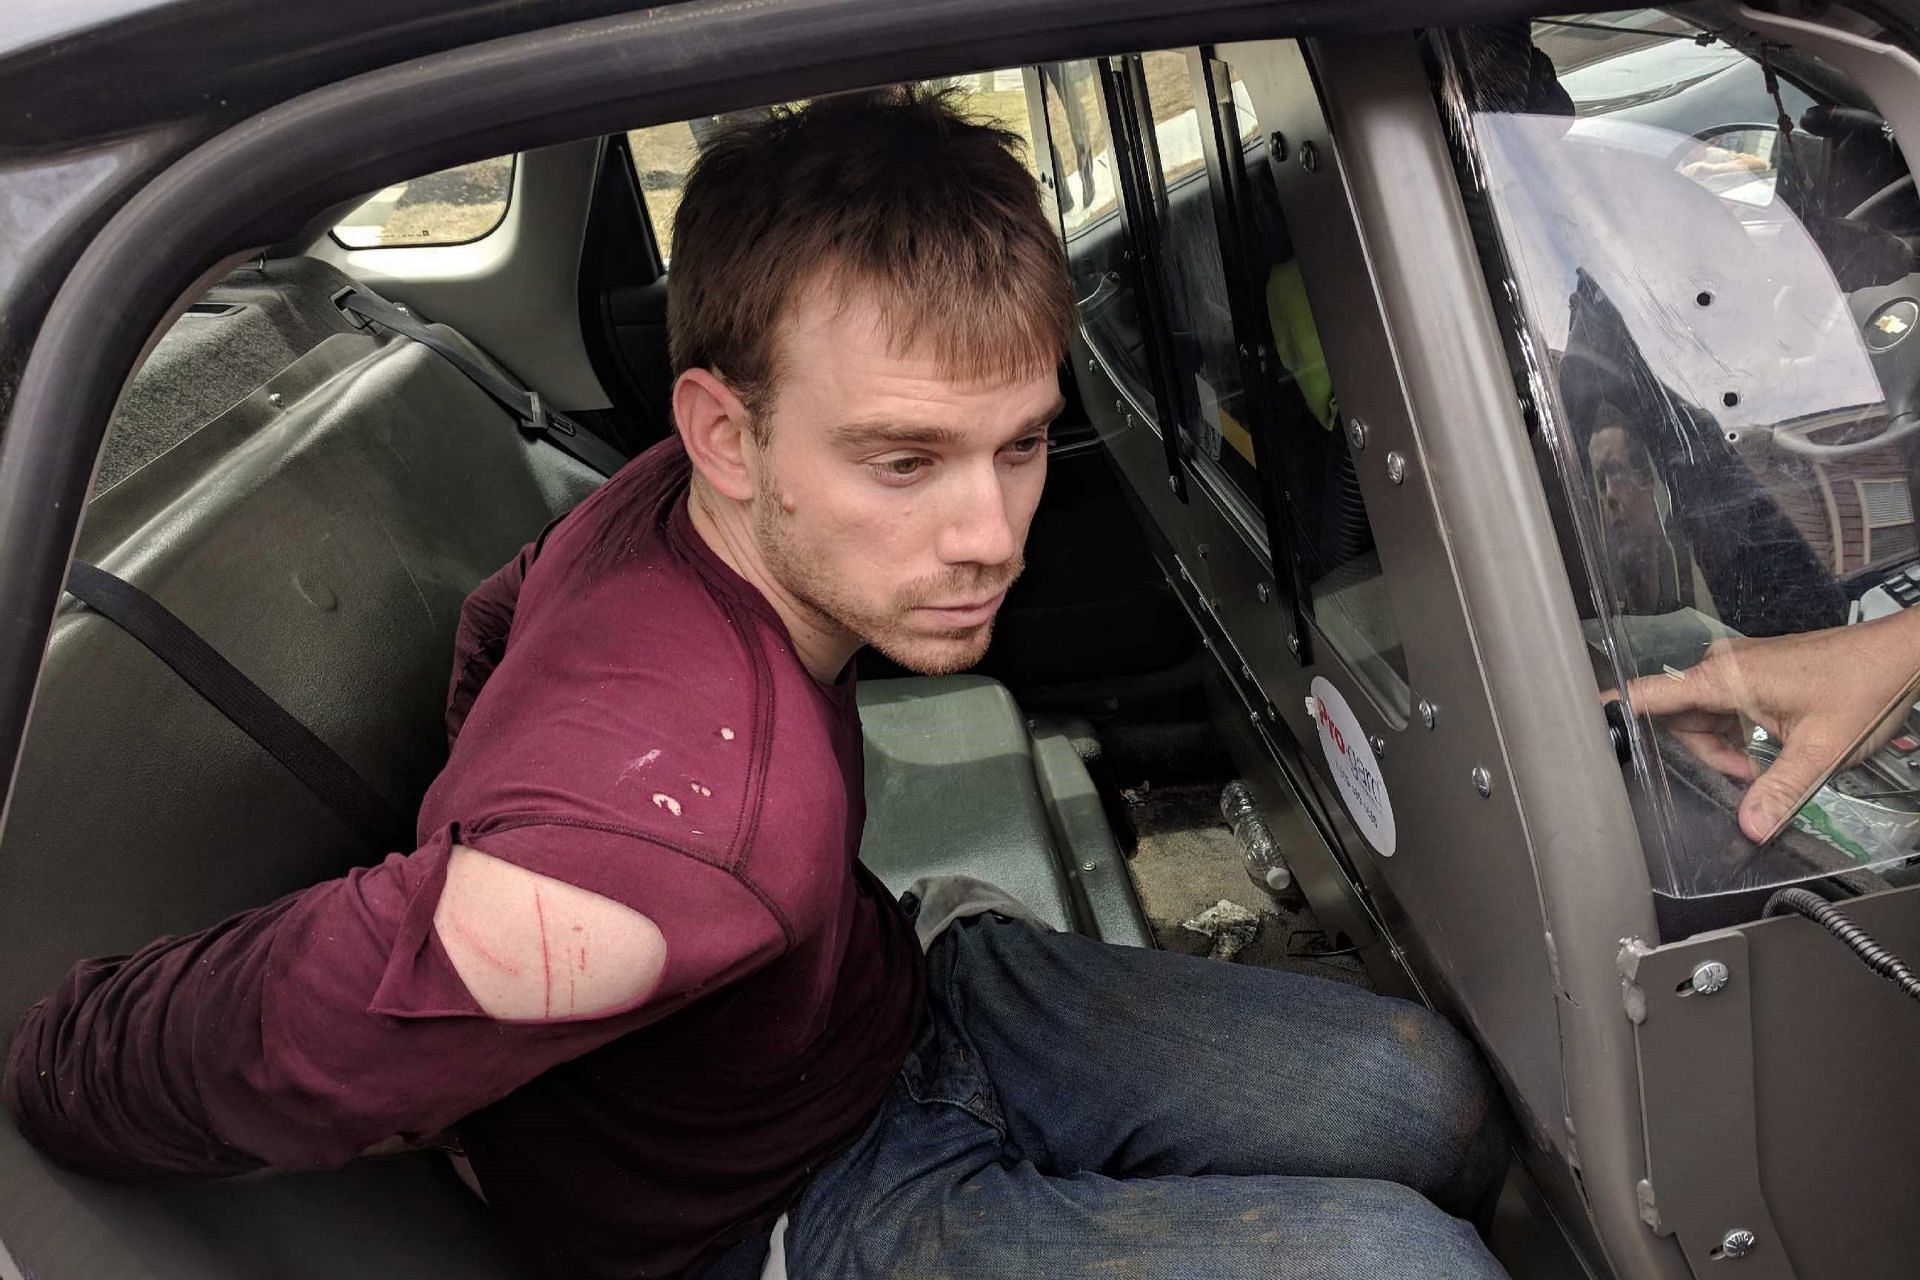 Travis Reinking killed four people in 2018 and has now been charged with eight first-degree murder charges (Image via Getty Images/ Metro Nashville Police Department)